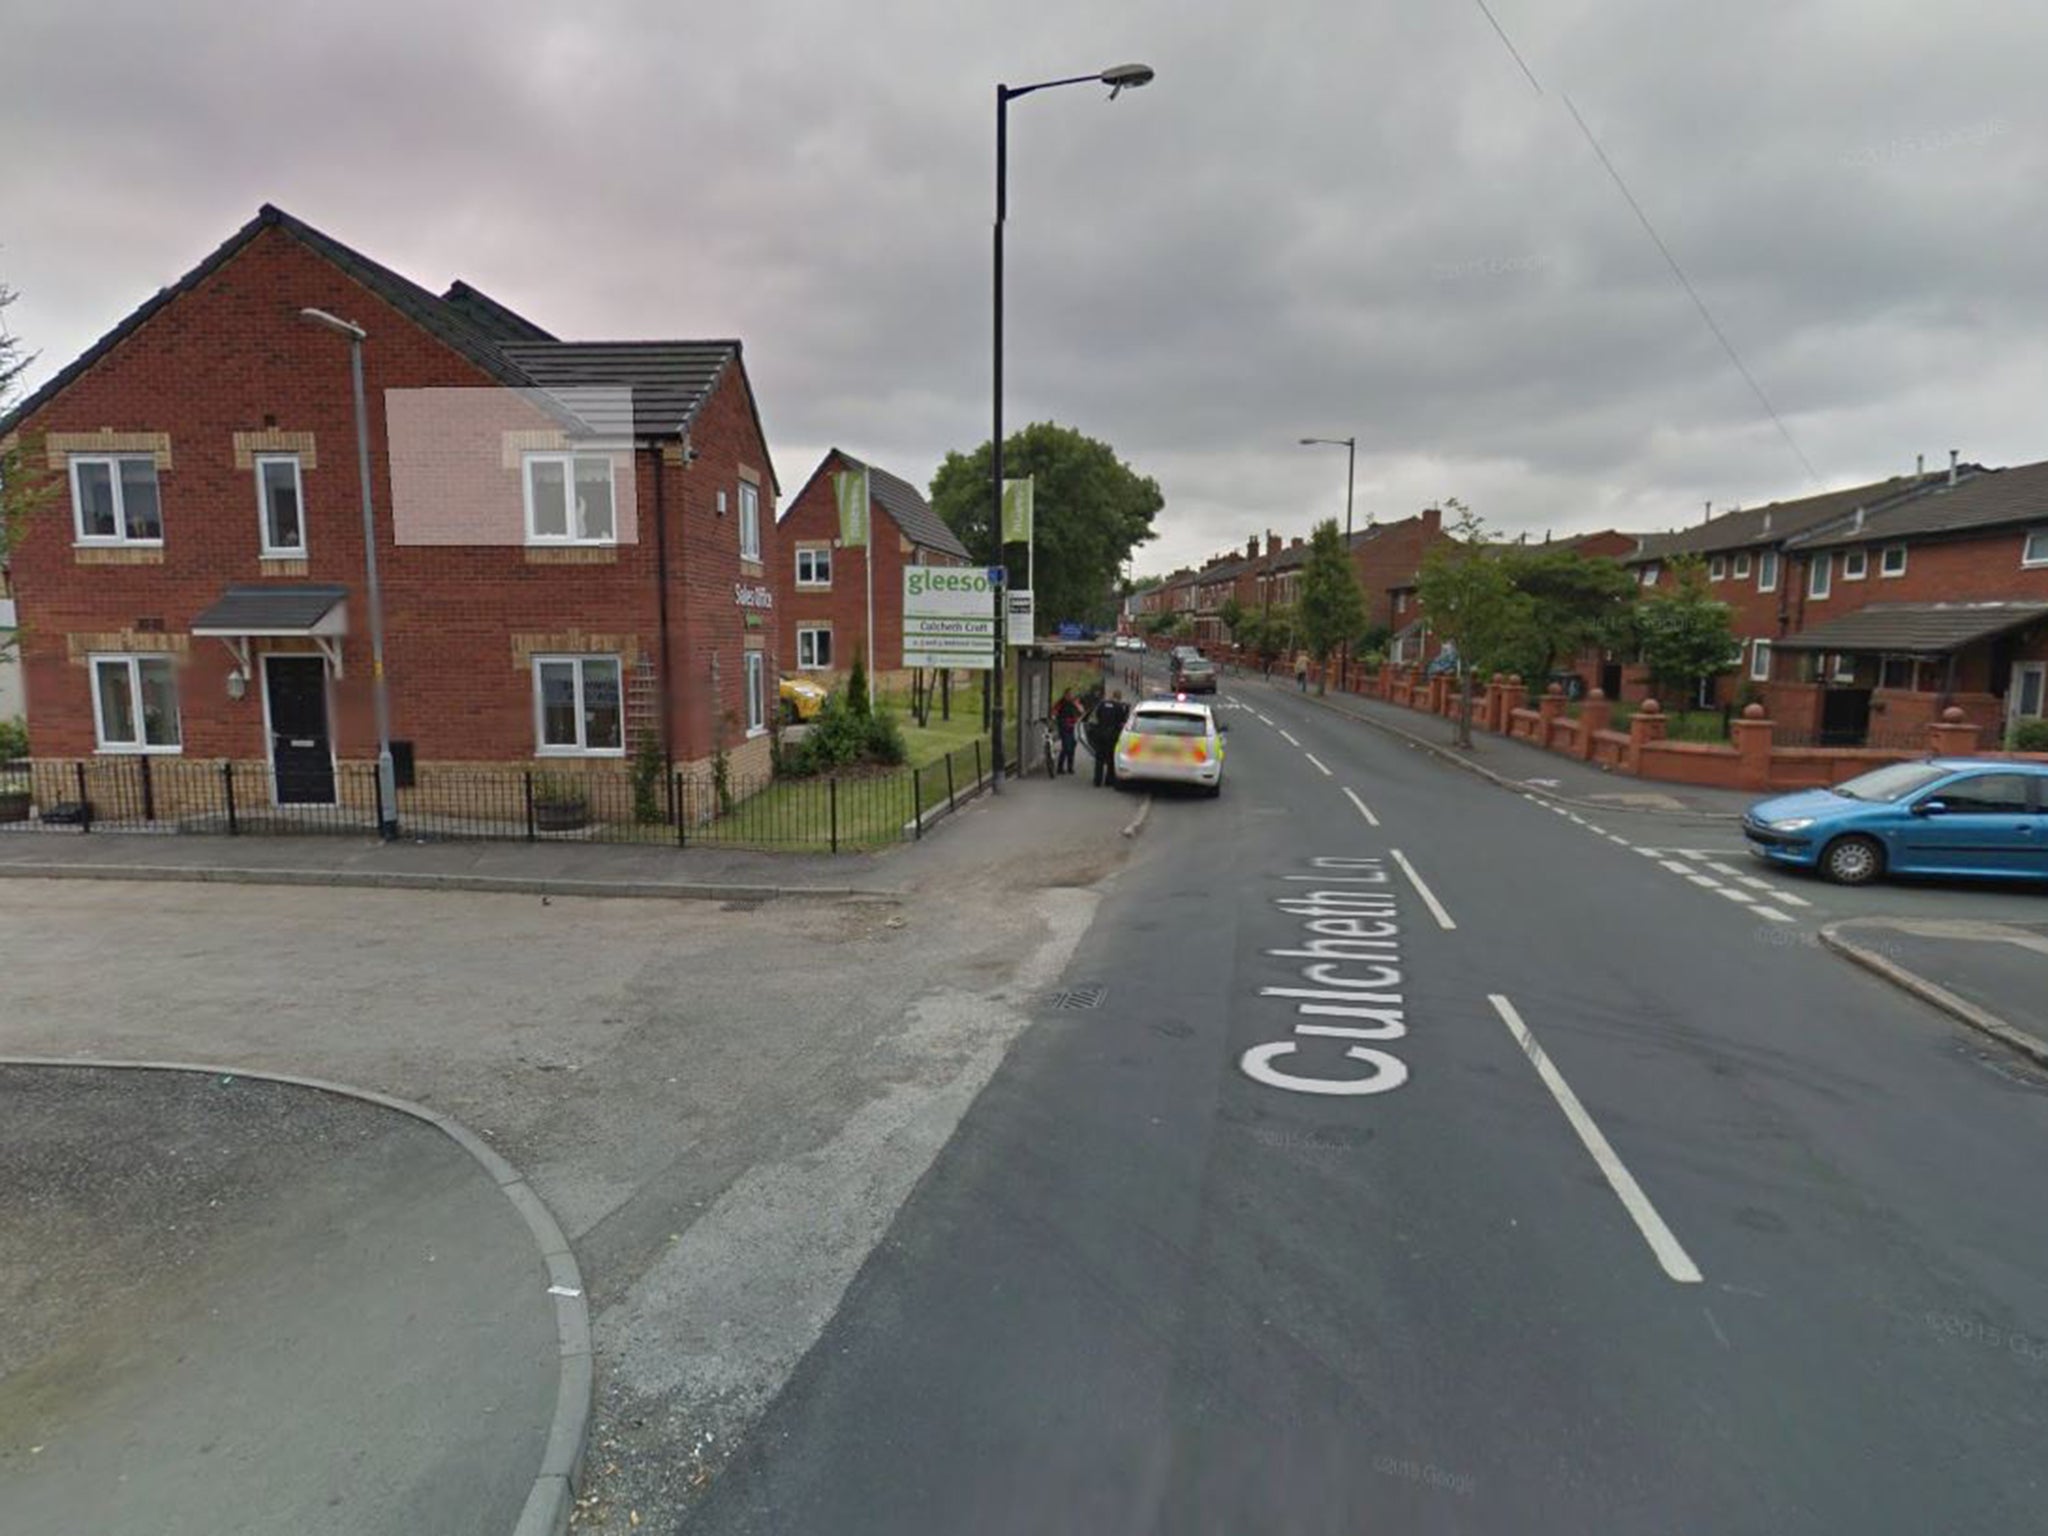 Police were called to an address on Culcheth Lane at 12.45am today